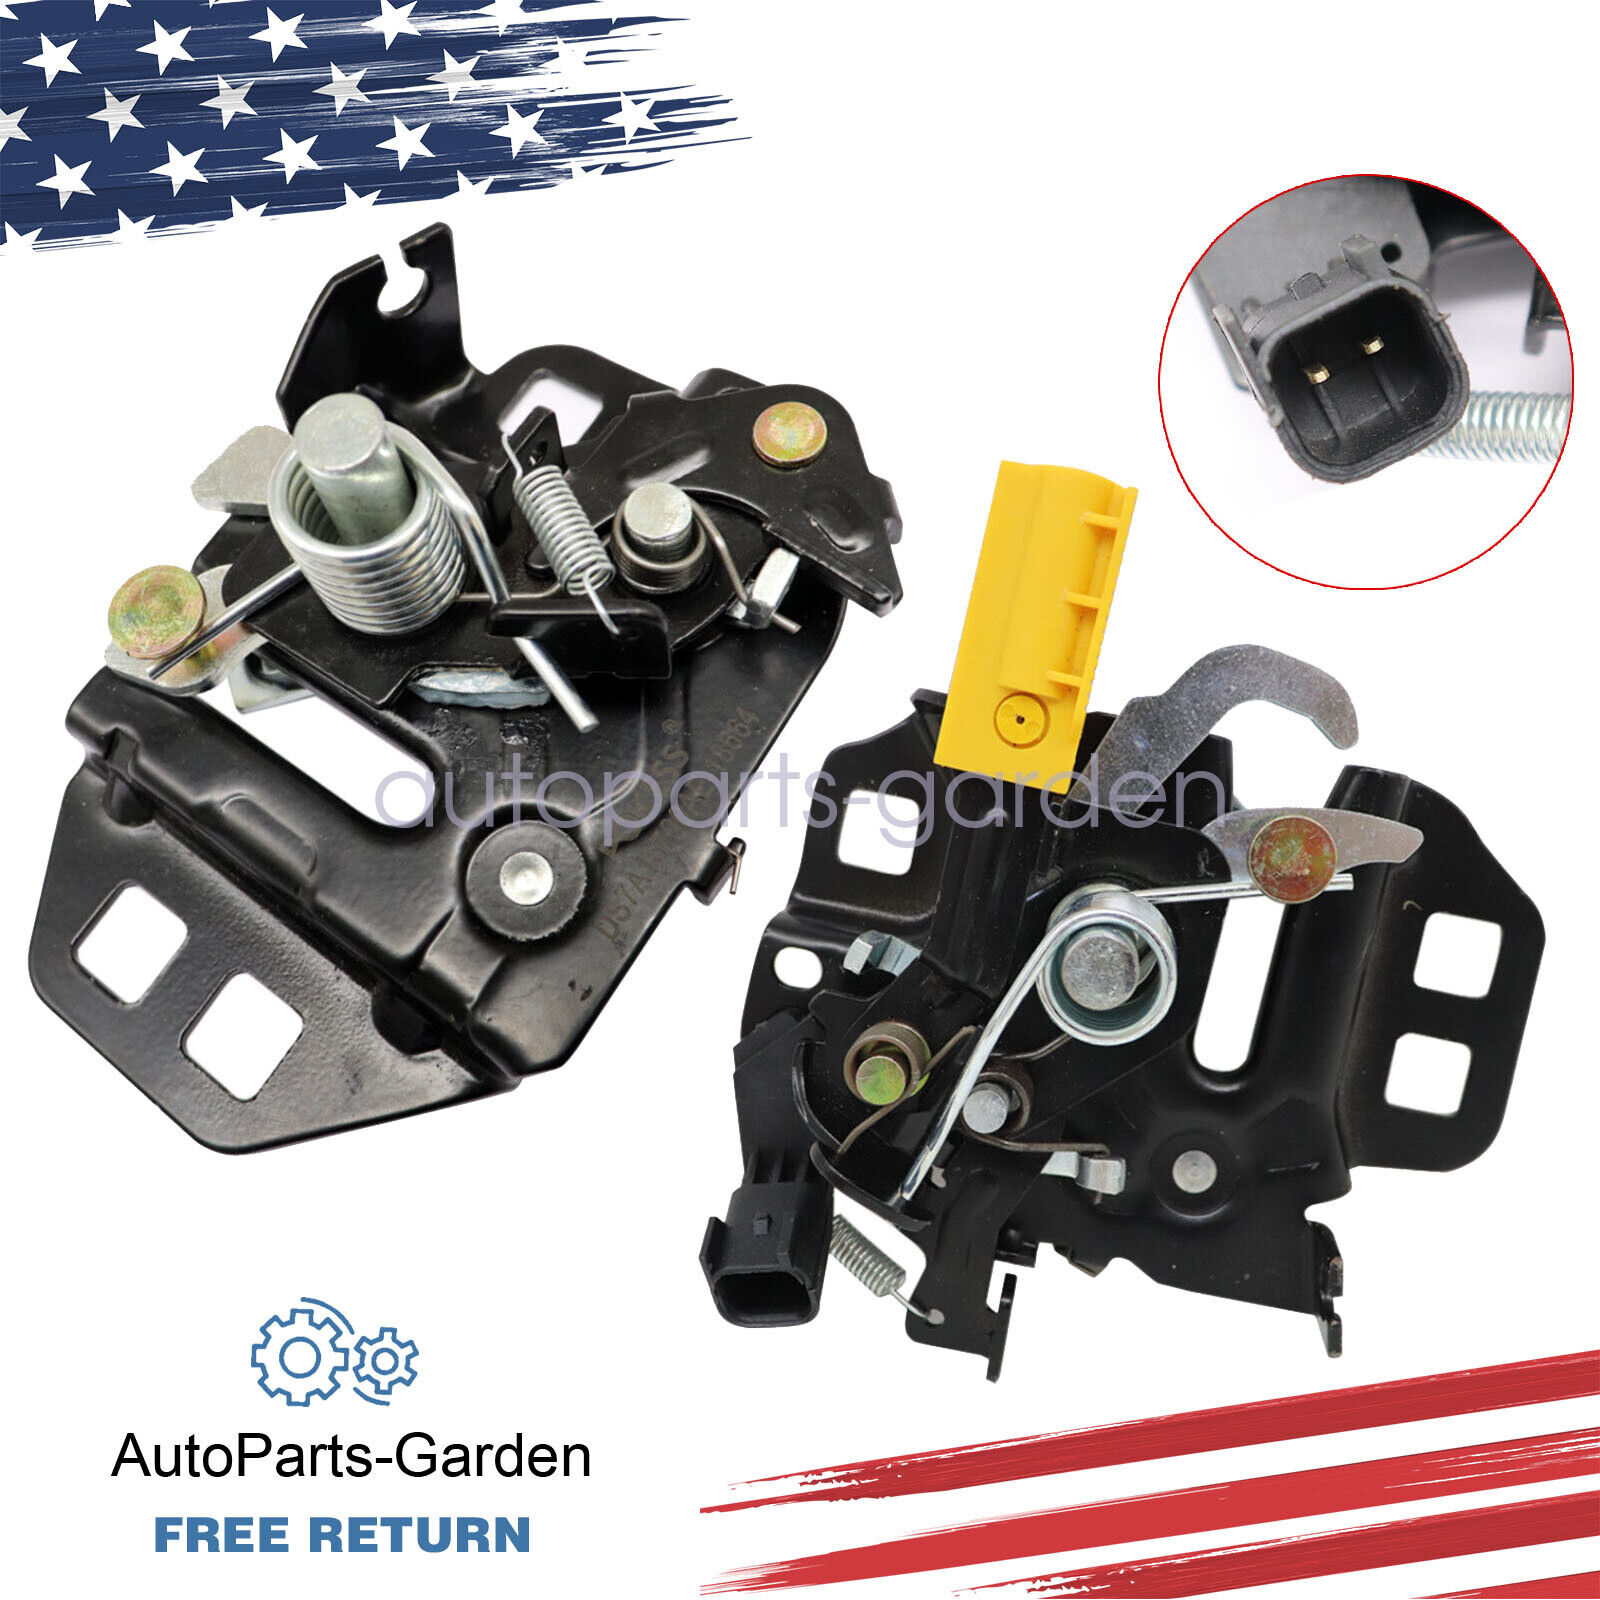 2Pcs Hood Lock Latch Driver & Passenger Side Fit Ford Fusion 2013-2018 2019 2020